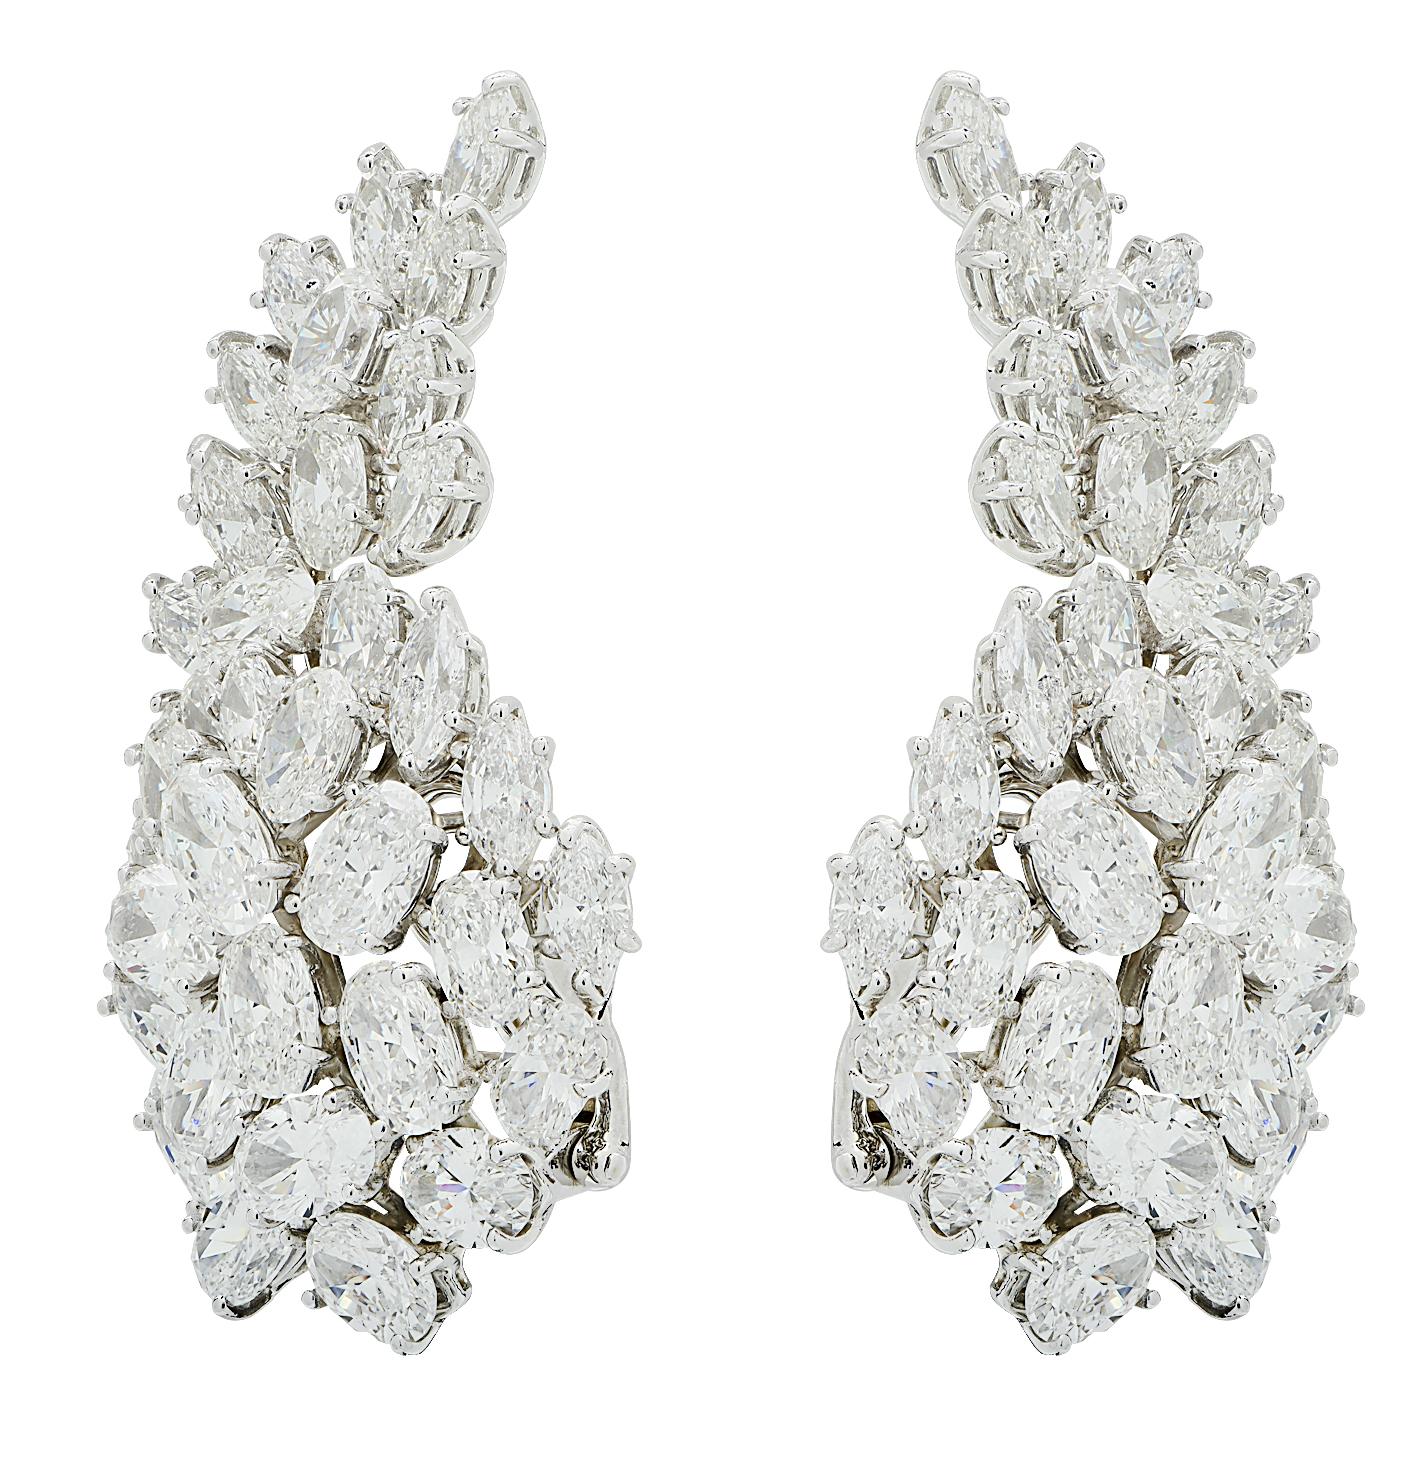 Contemporary Hammerman Brothers 30 Carat Diamond Earrings For Sale